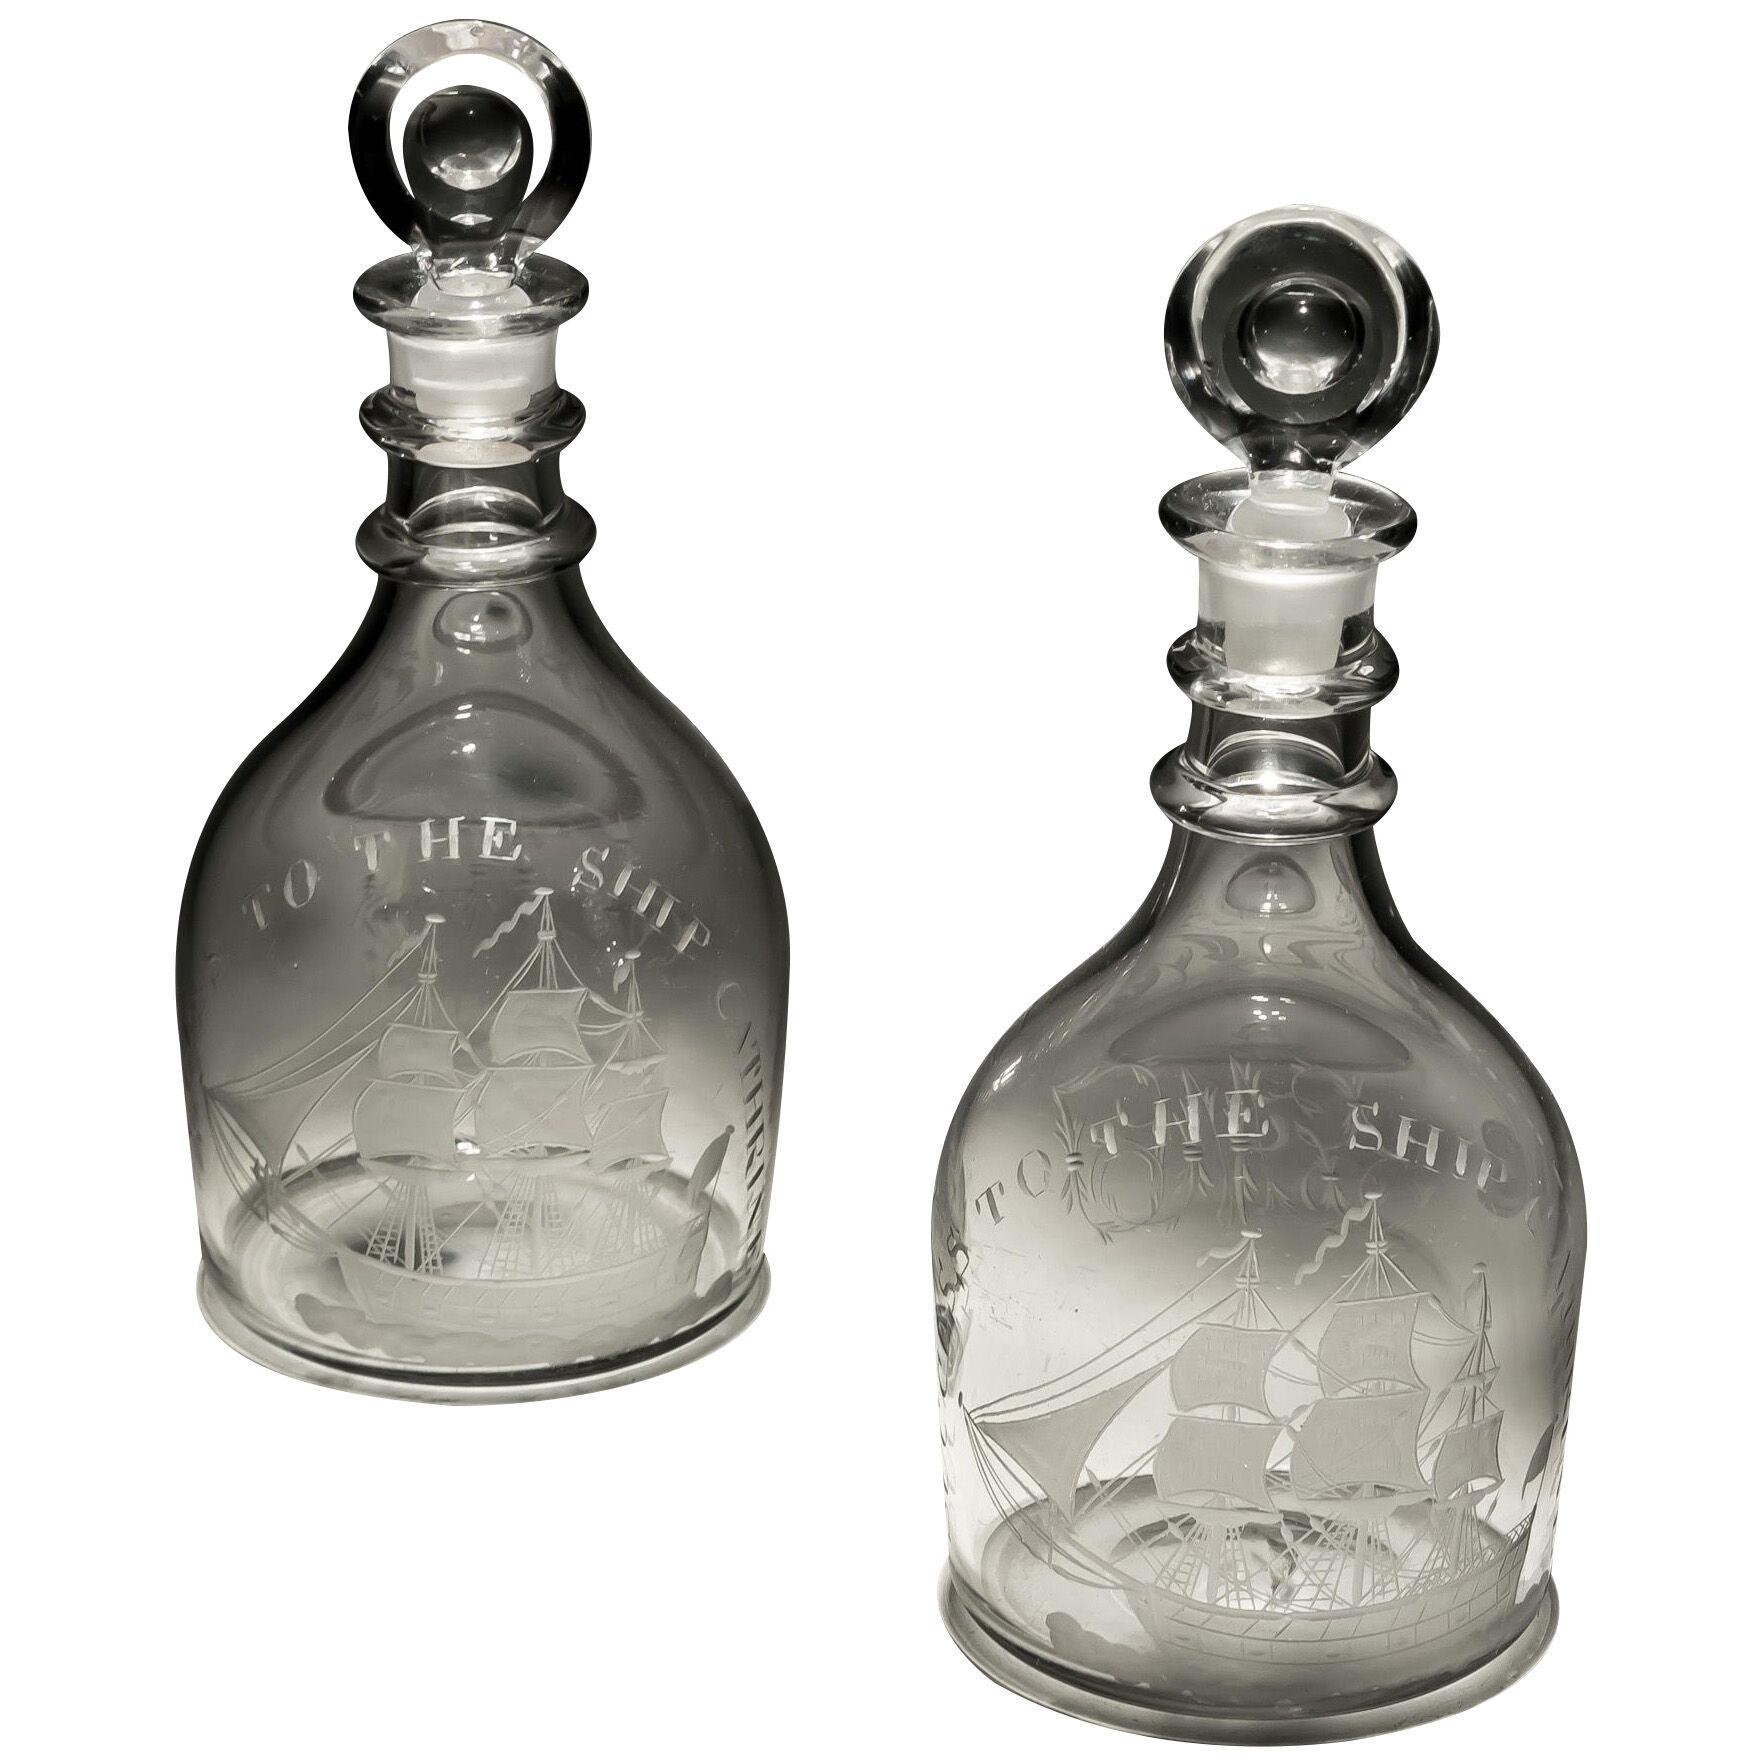 A PAIR OF GEORGIAN DECANTERS OF NAUTICAL INTEREST